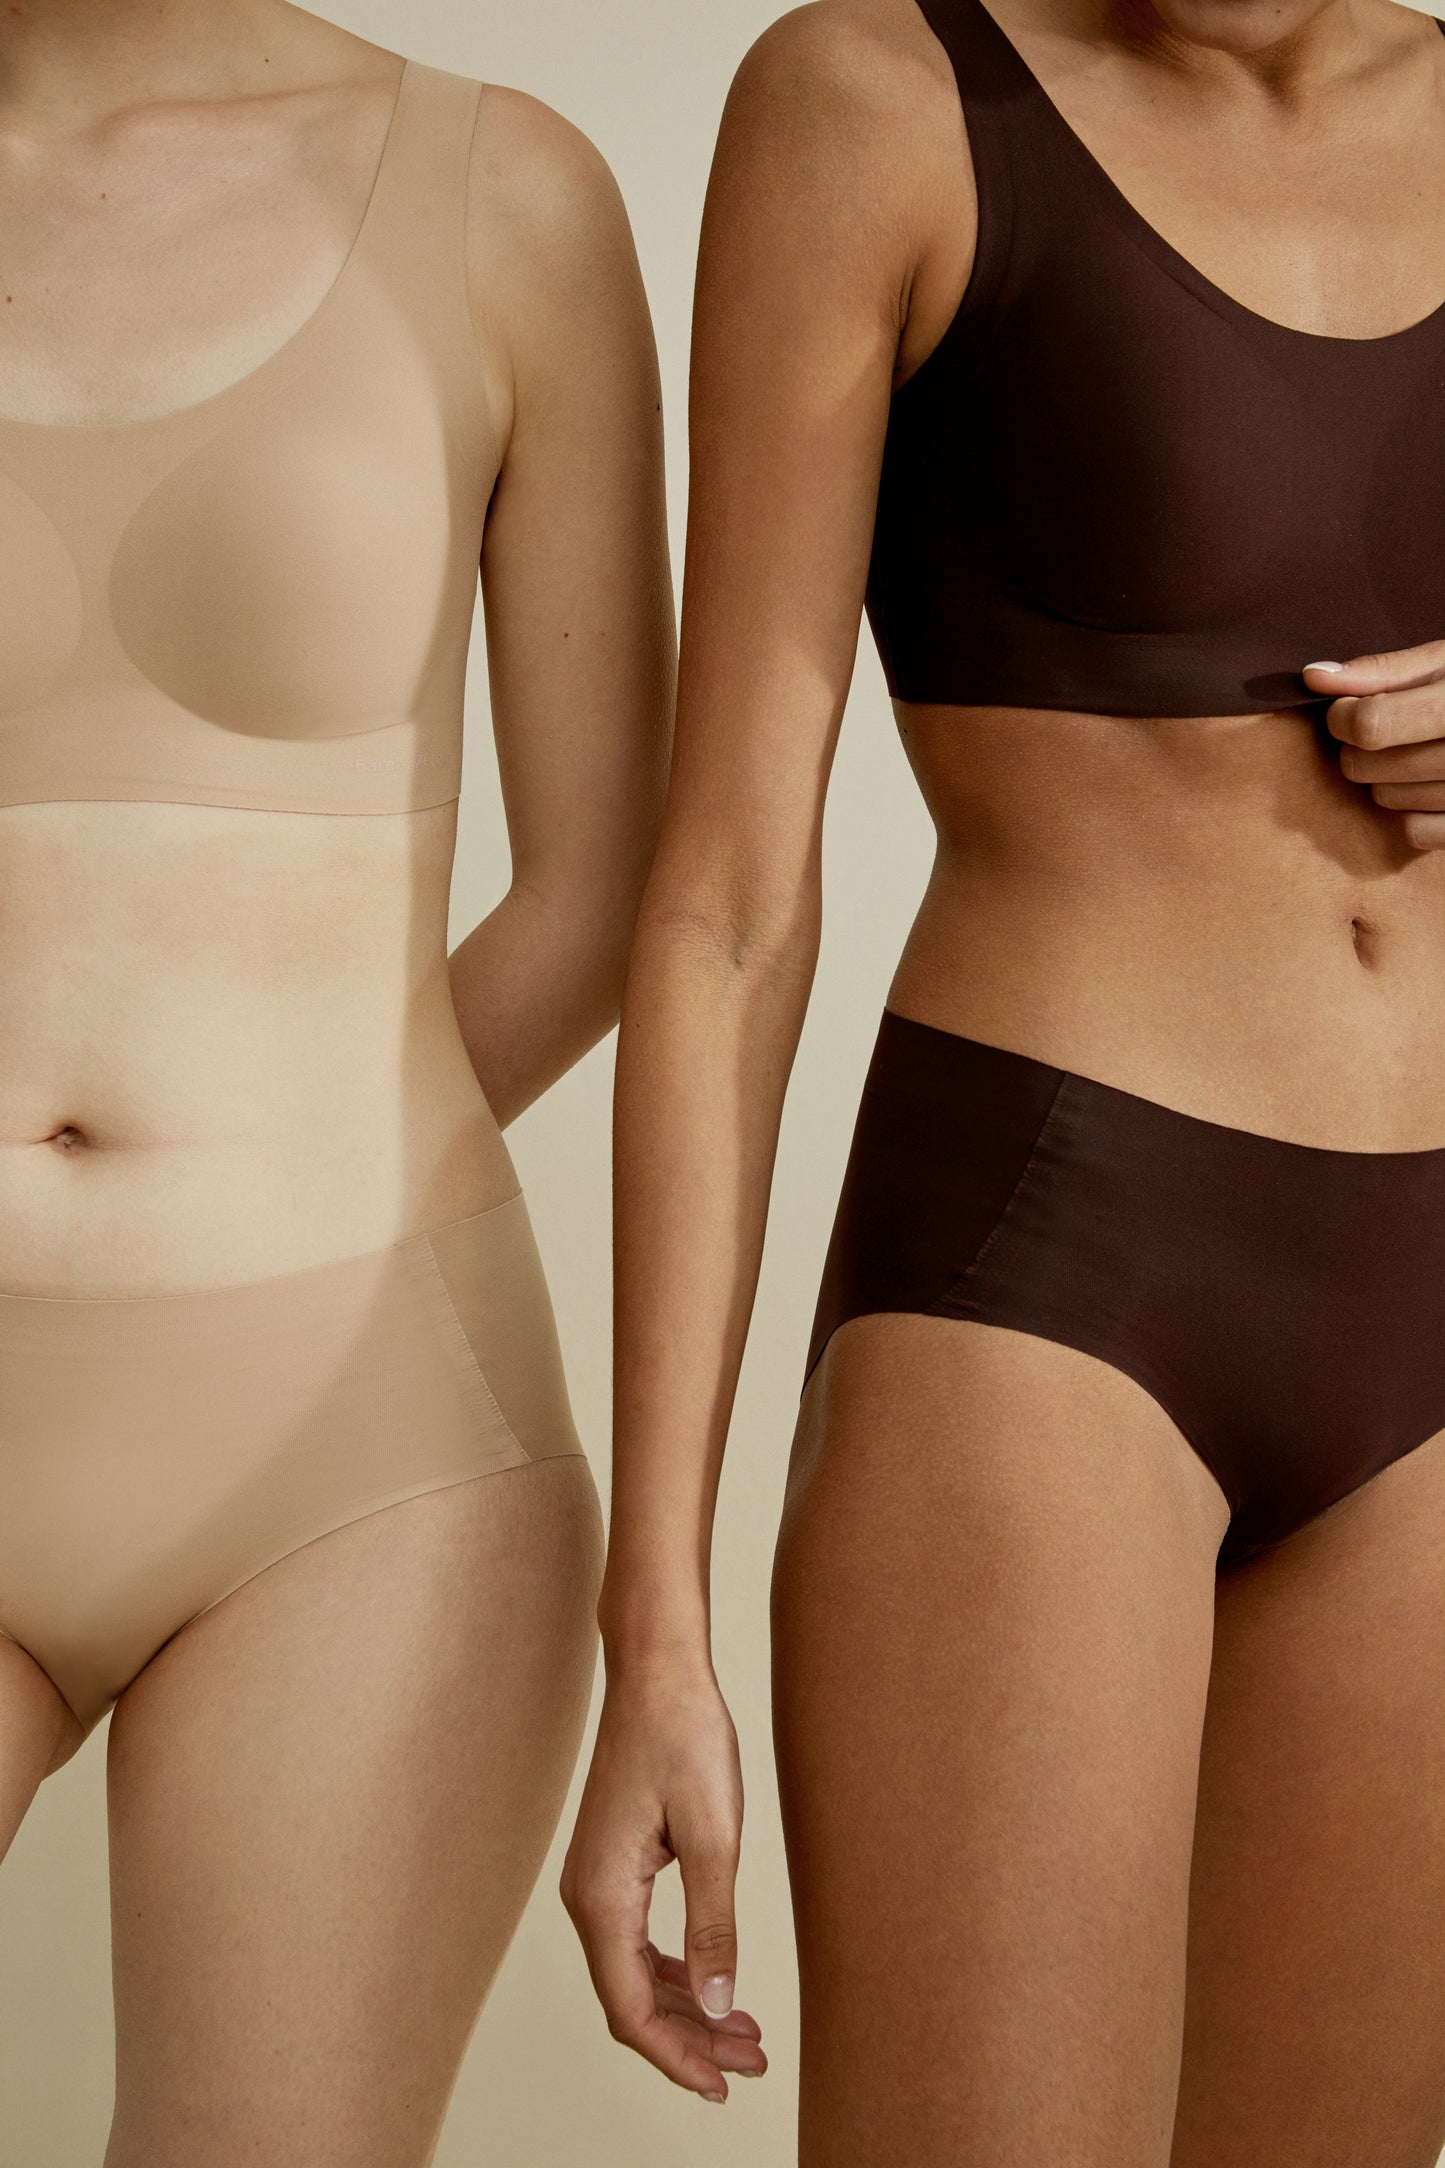 Two women showcasing Barely Zero Classic Bra Trio in neutral colors, one in a beige set and the other in brown, focusing on torso and legs against a plain background.